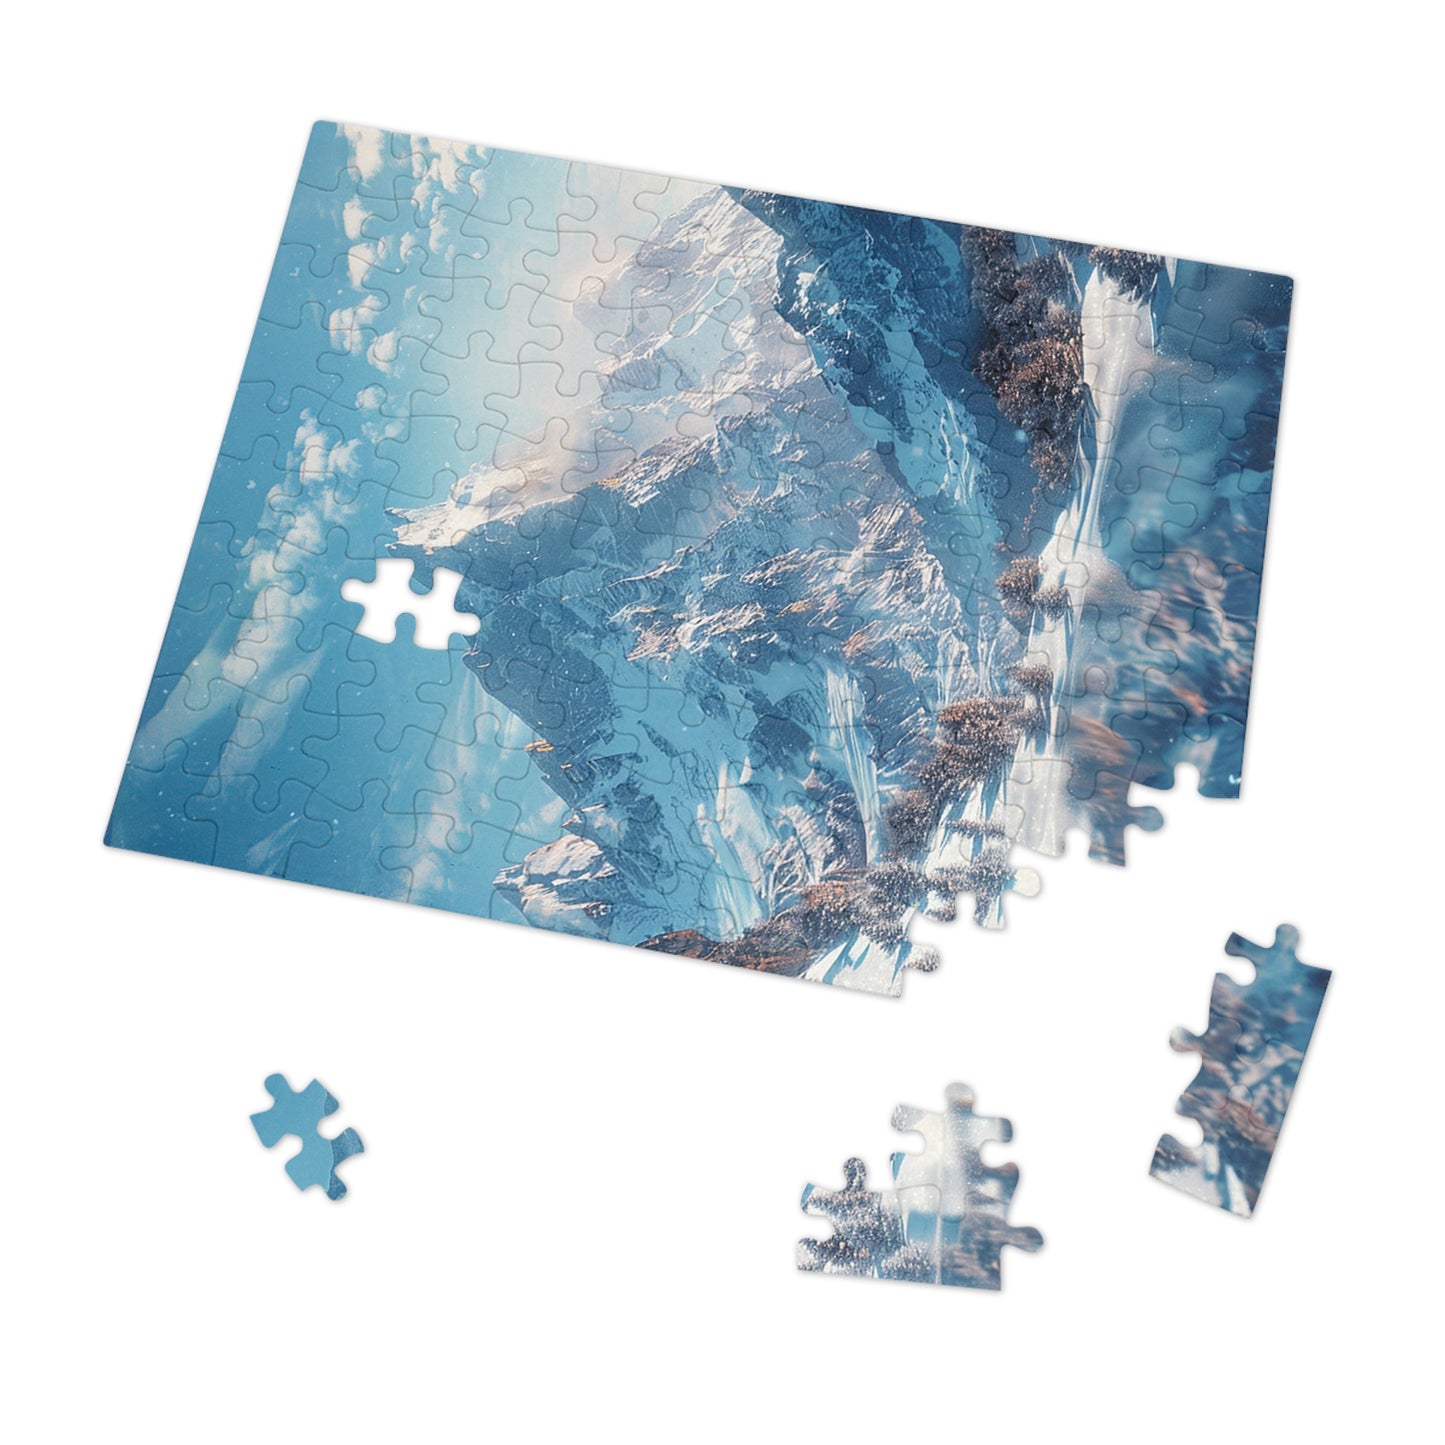 Painting of a Magnificent Snowy Mountain  Jigsaw Puzzle (30, 110, 252, 500,1000-Piece)